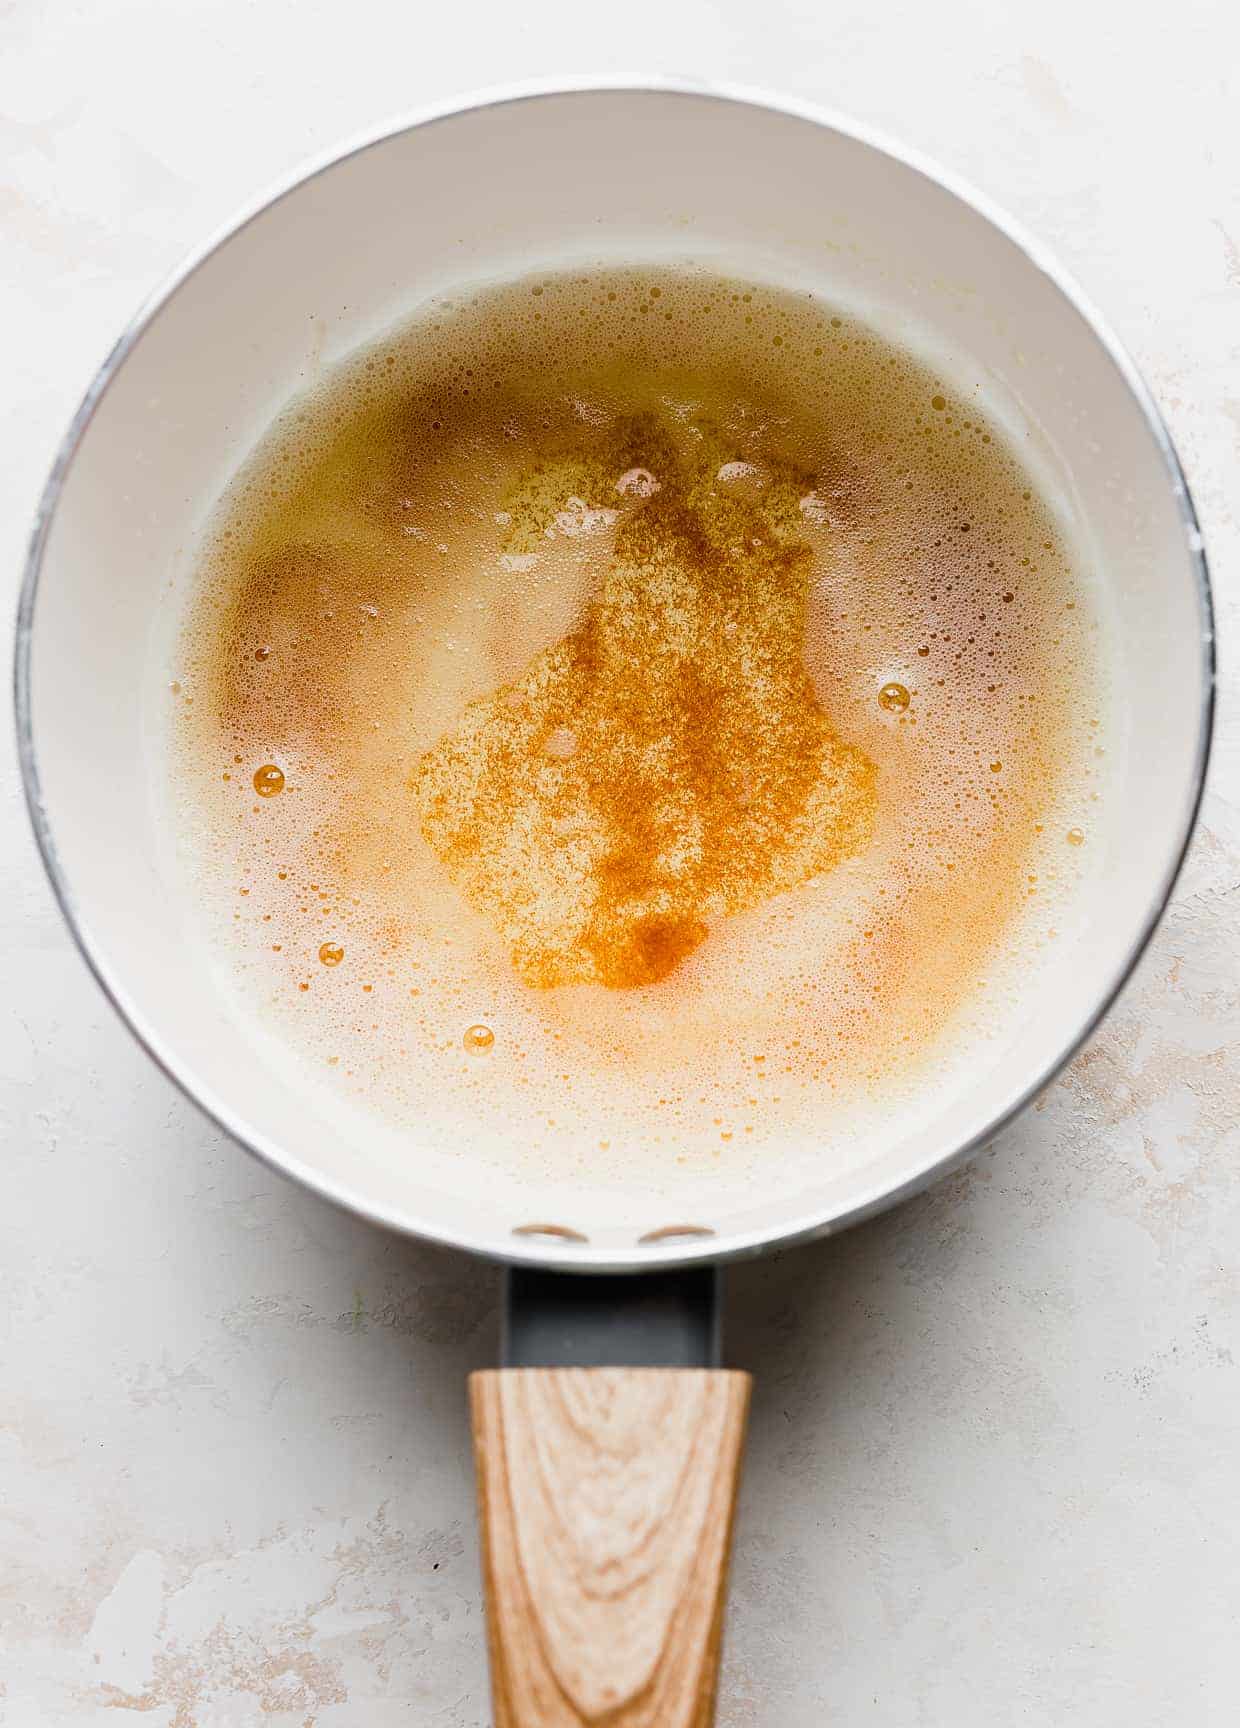 A white sauce pan with browned butter (a light amber color) in it.